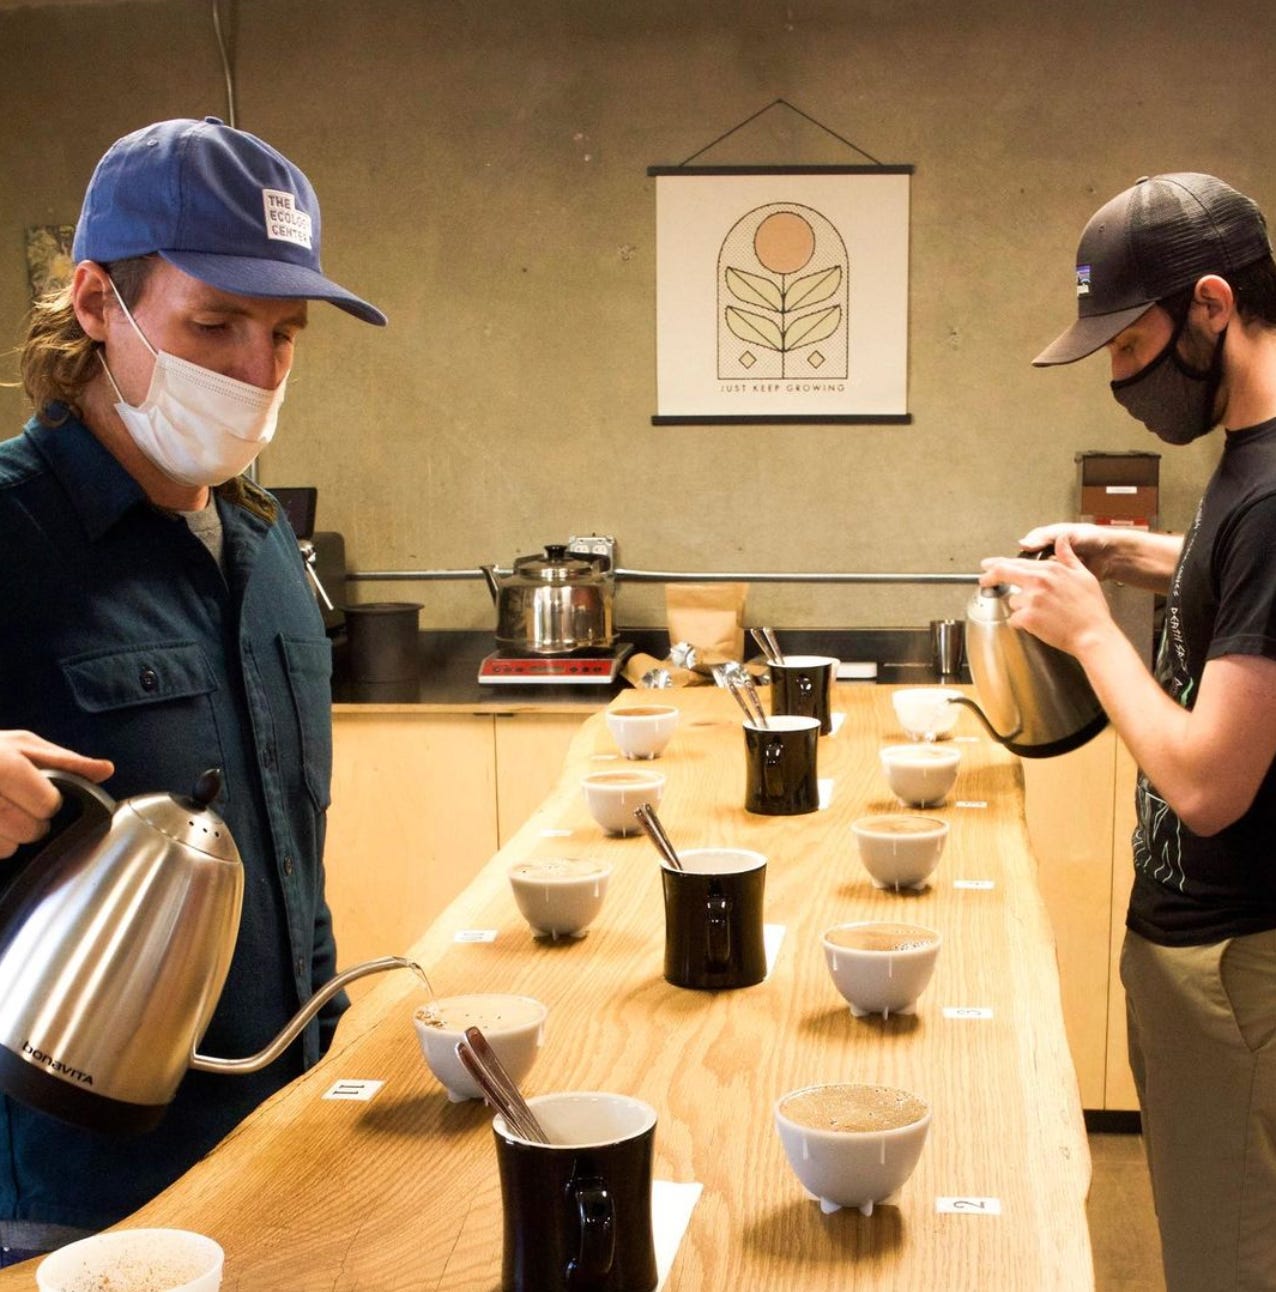 Two men on opposite sides of a long wooden table pour water out of goose-neck kettles into coffee cupping bowls (like small soup bowls)